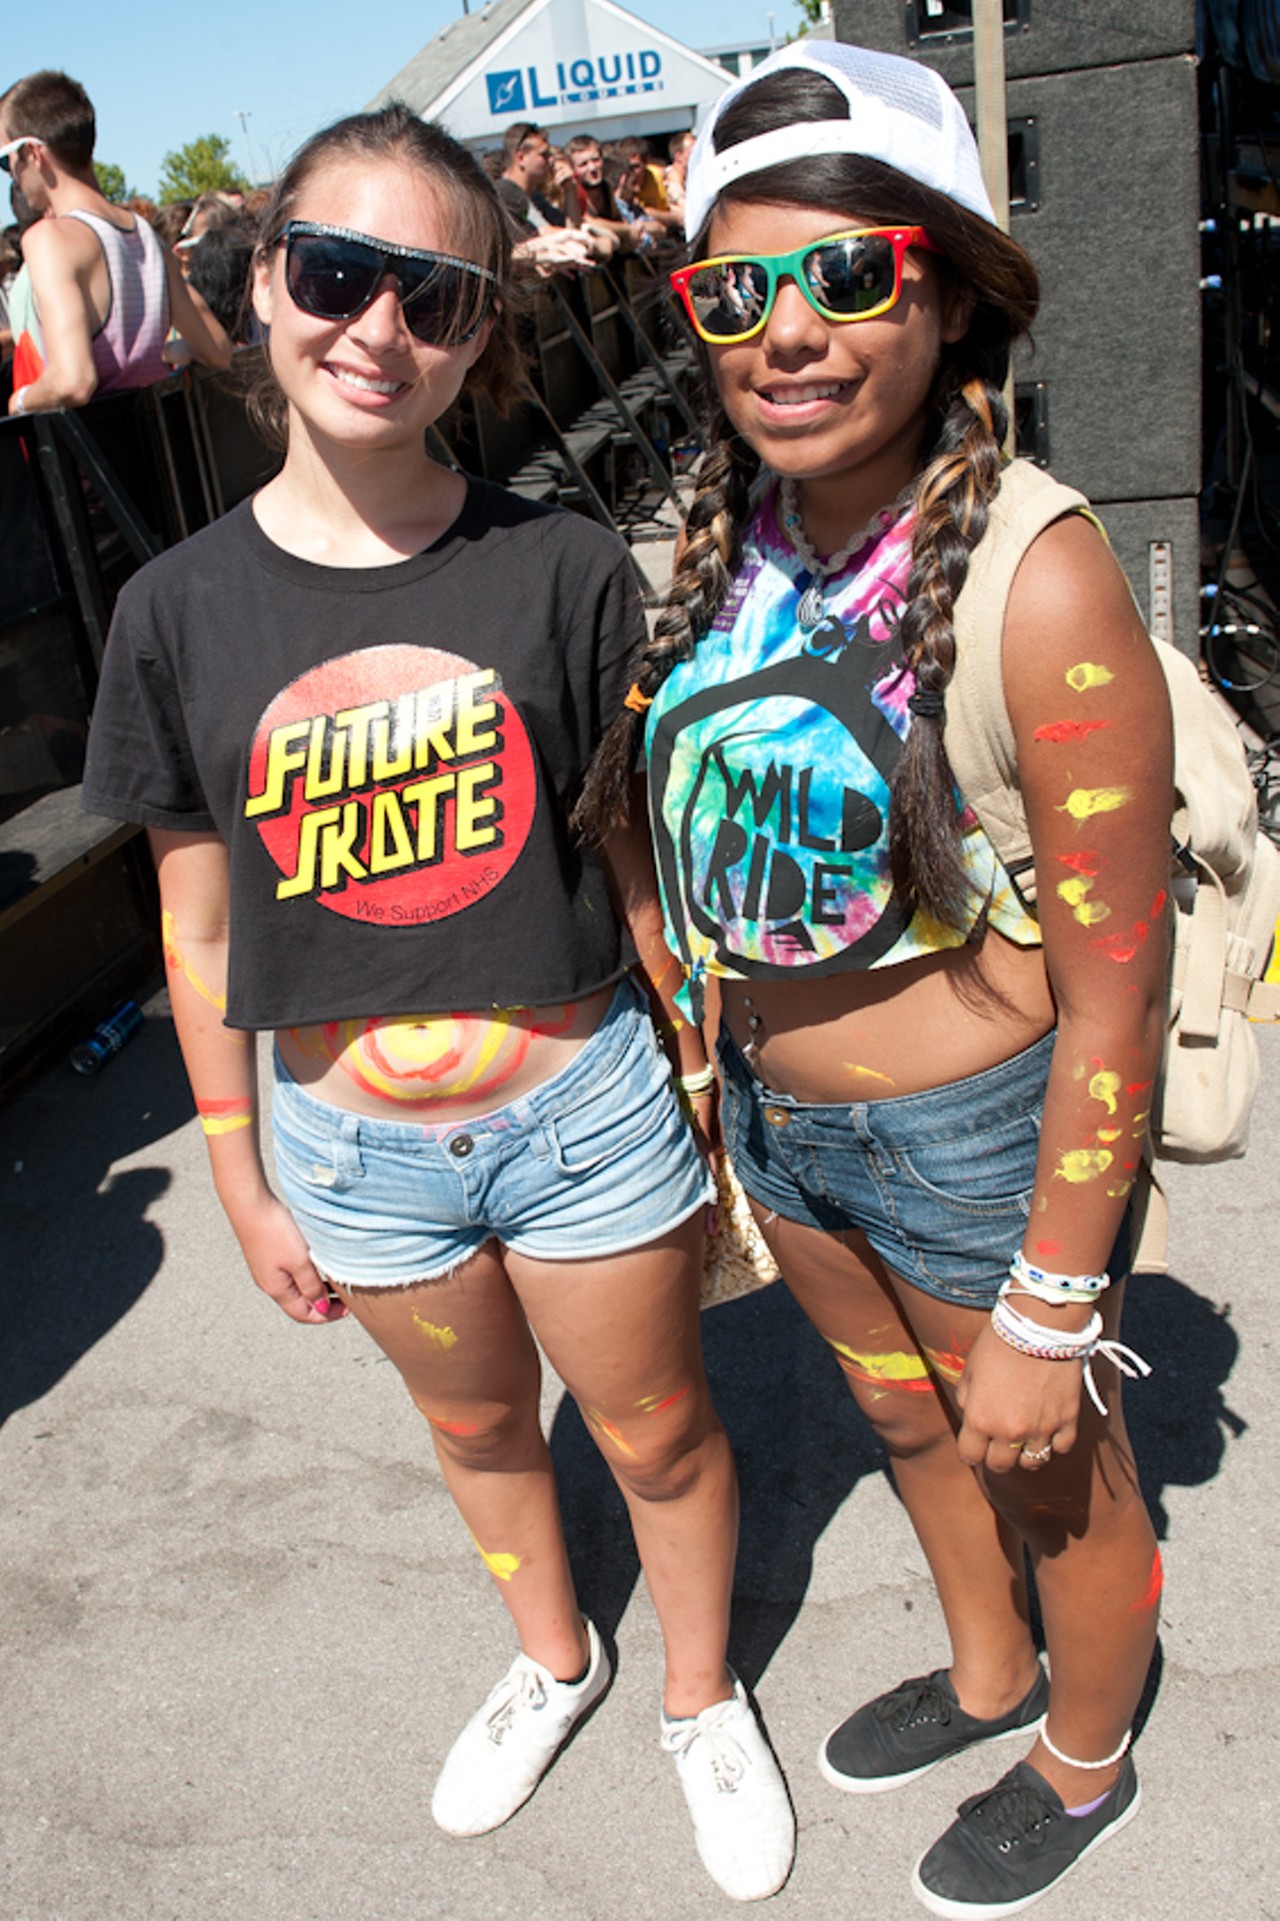 People of the St. Louis Warped Tour